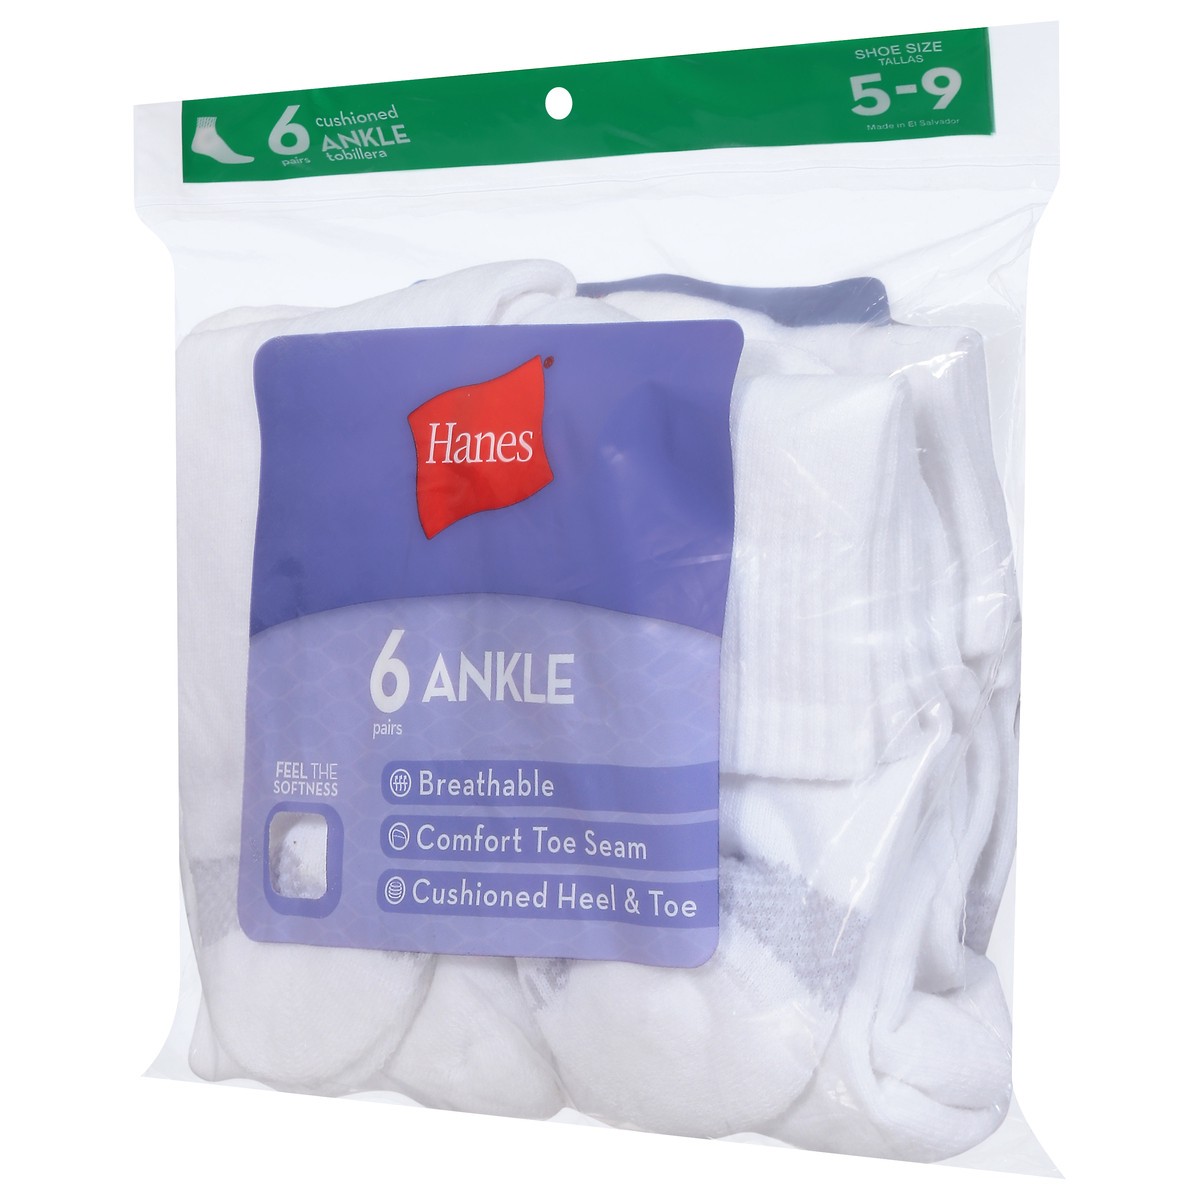 slide 3 of 9, Hanes Shoe Size 5-9 Cushioned Ankle Socks 6 Pairs, 1 ct